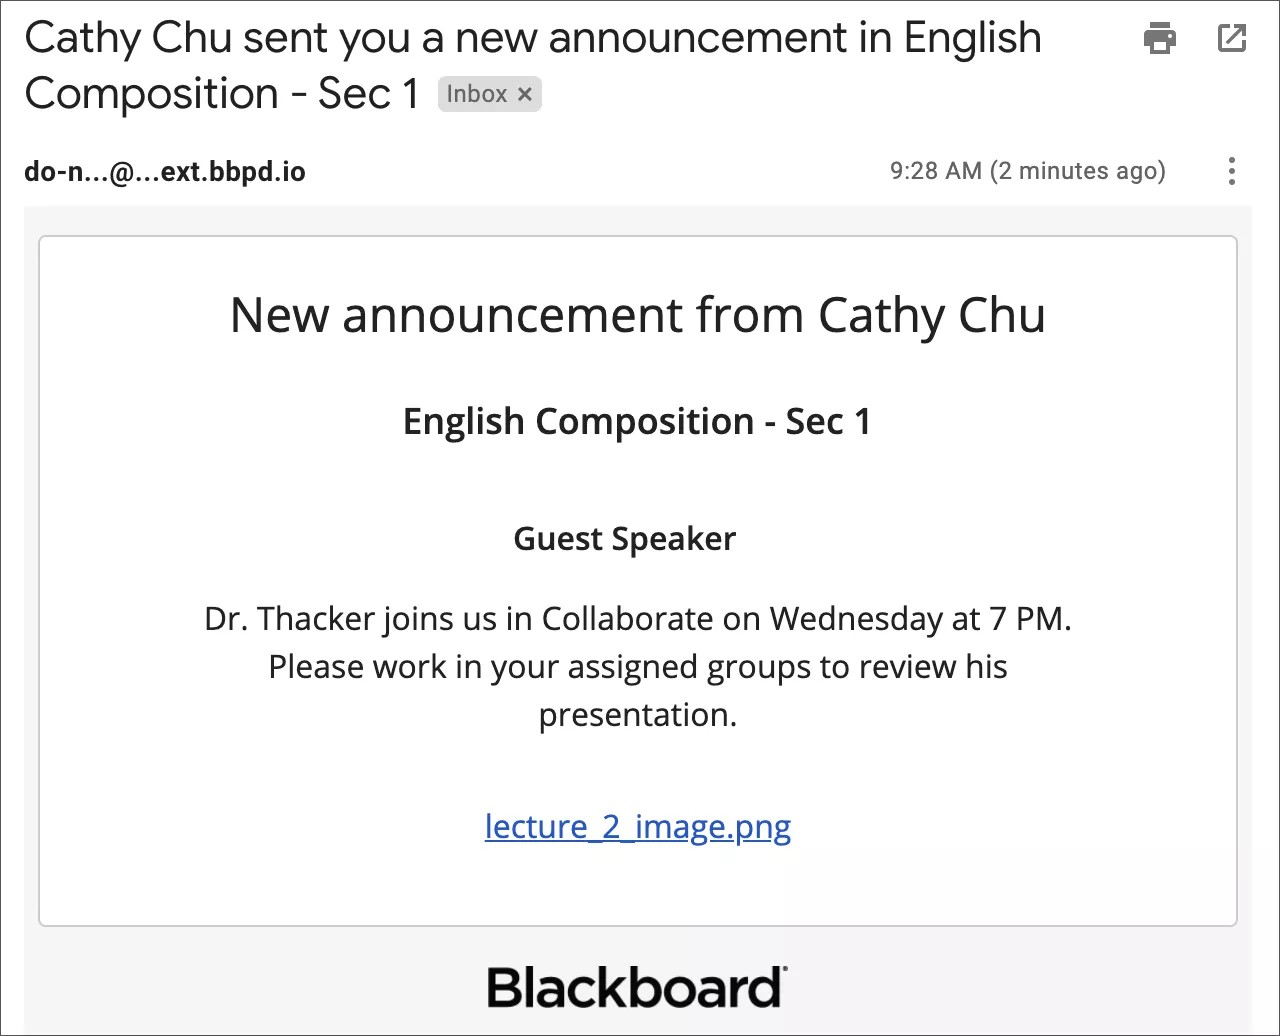 Email copy of an announcement sent to a student